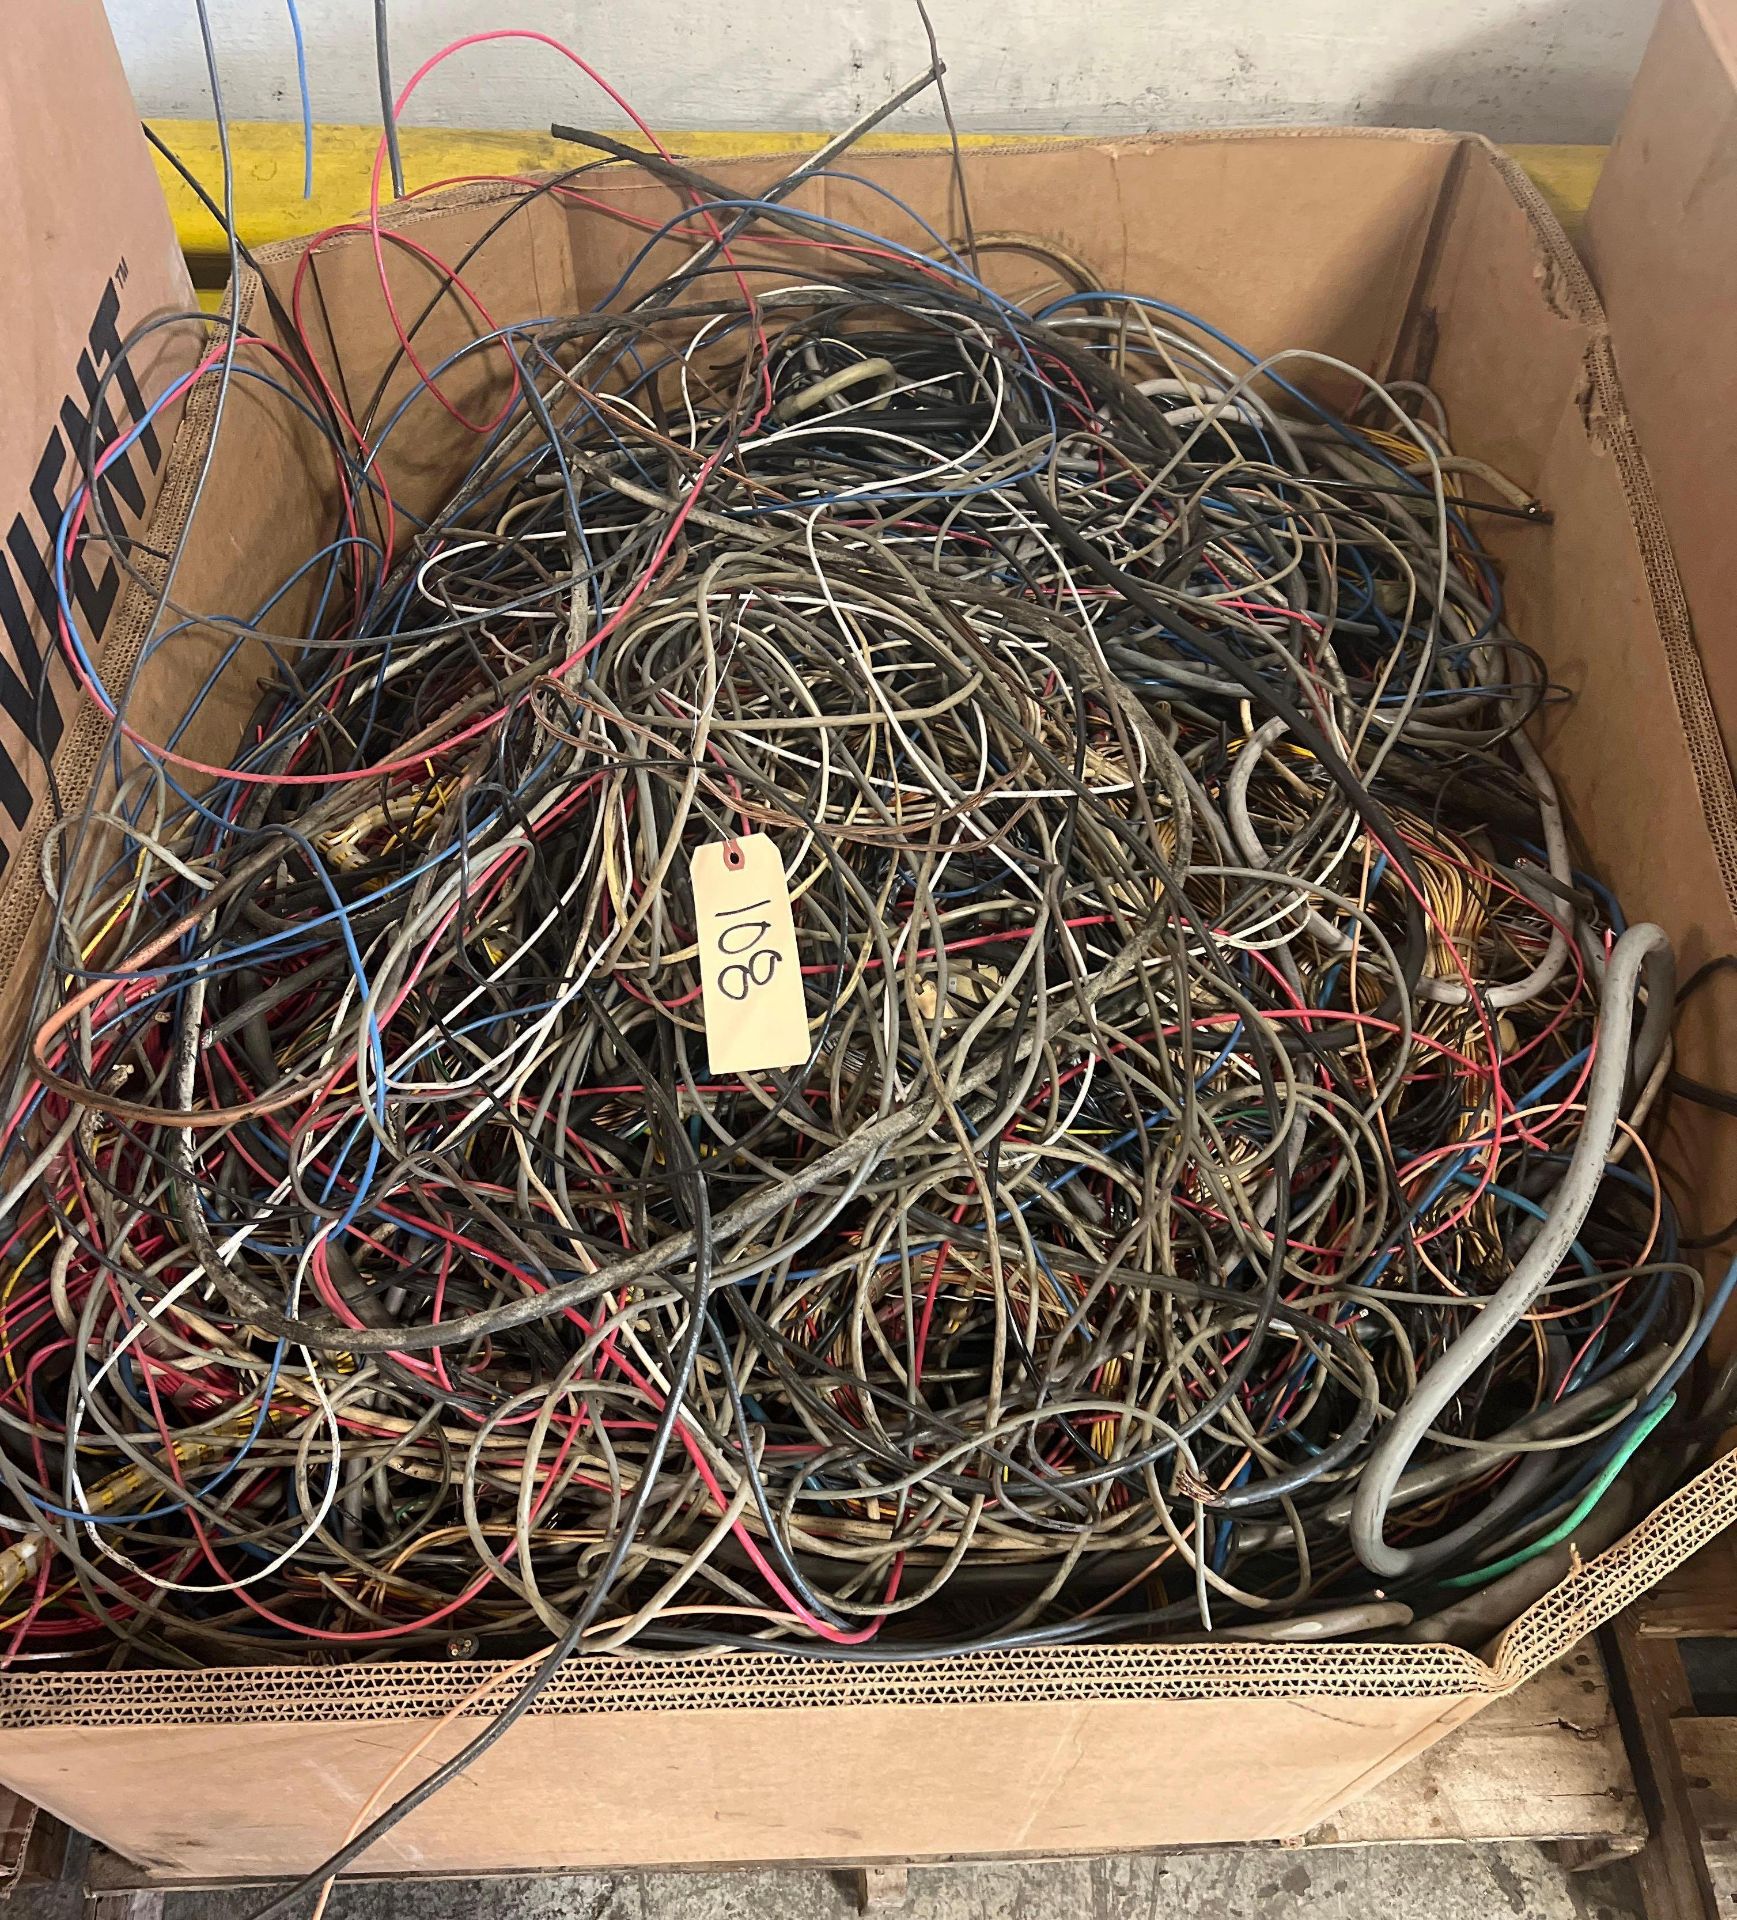 Scrap Wire (Insulated) 377 Lbs. (Includes Tare Weight)